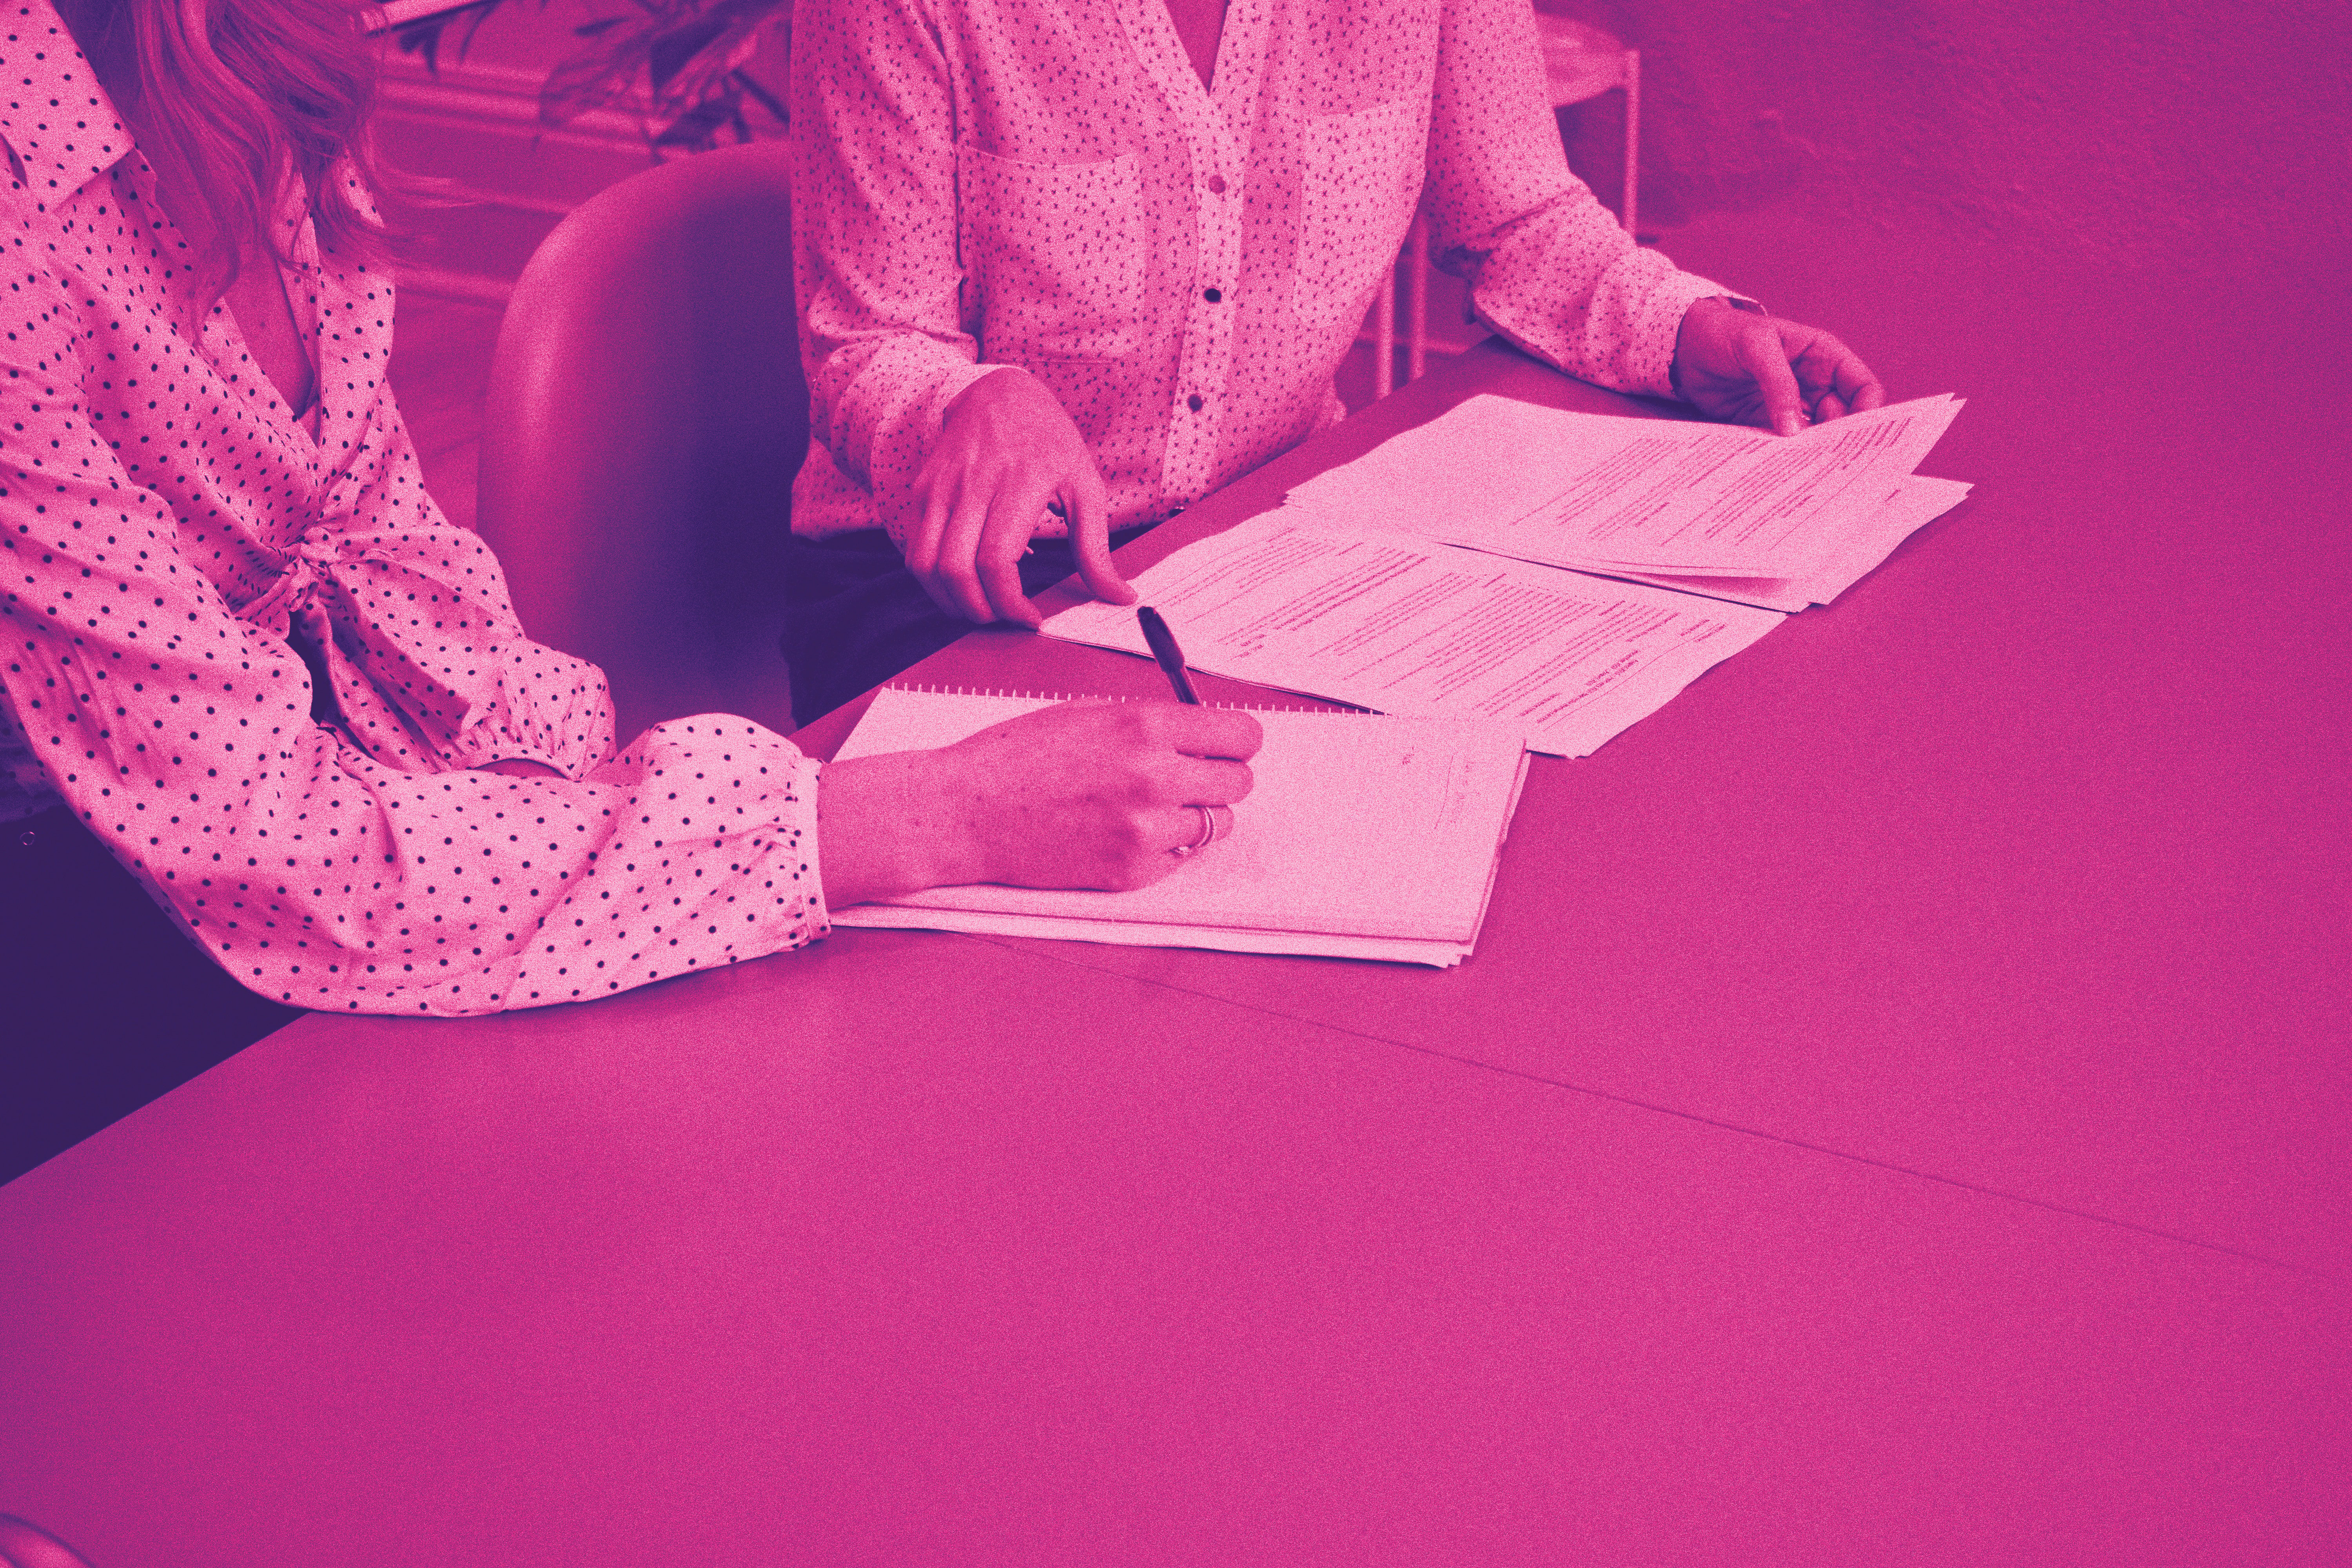 Two women sit at a table and sign contracts. With pink filter